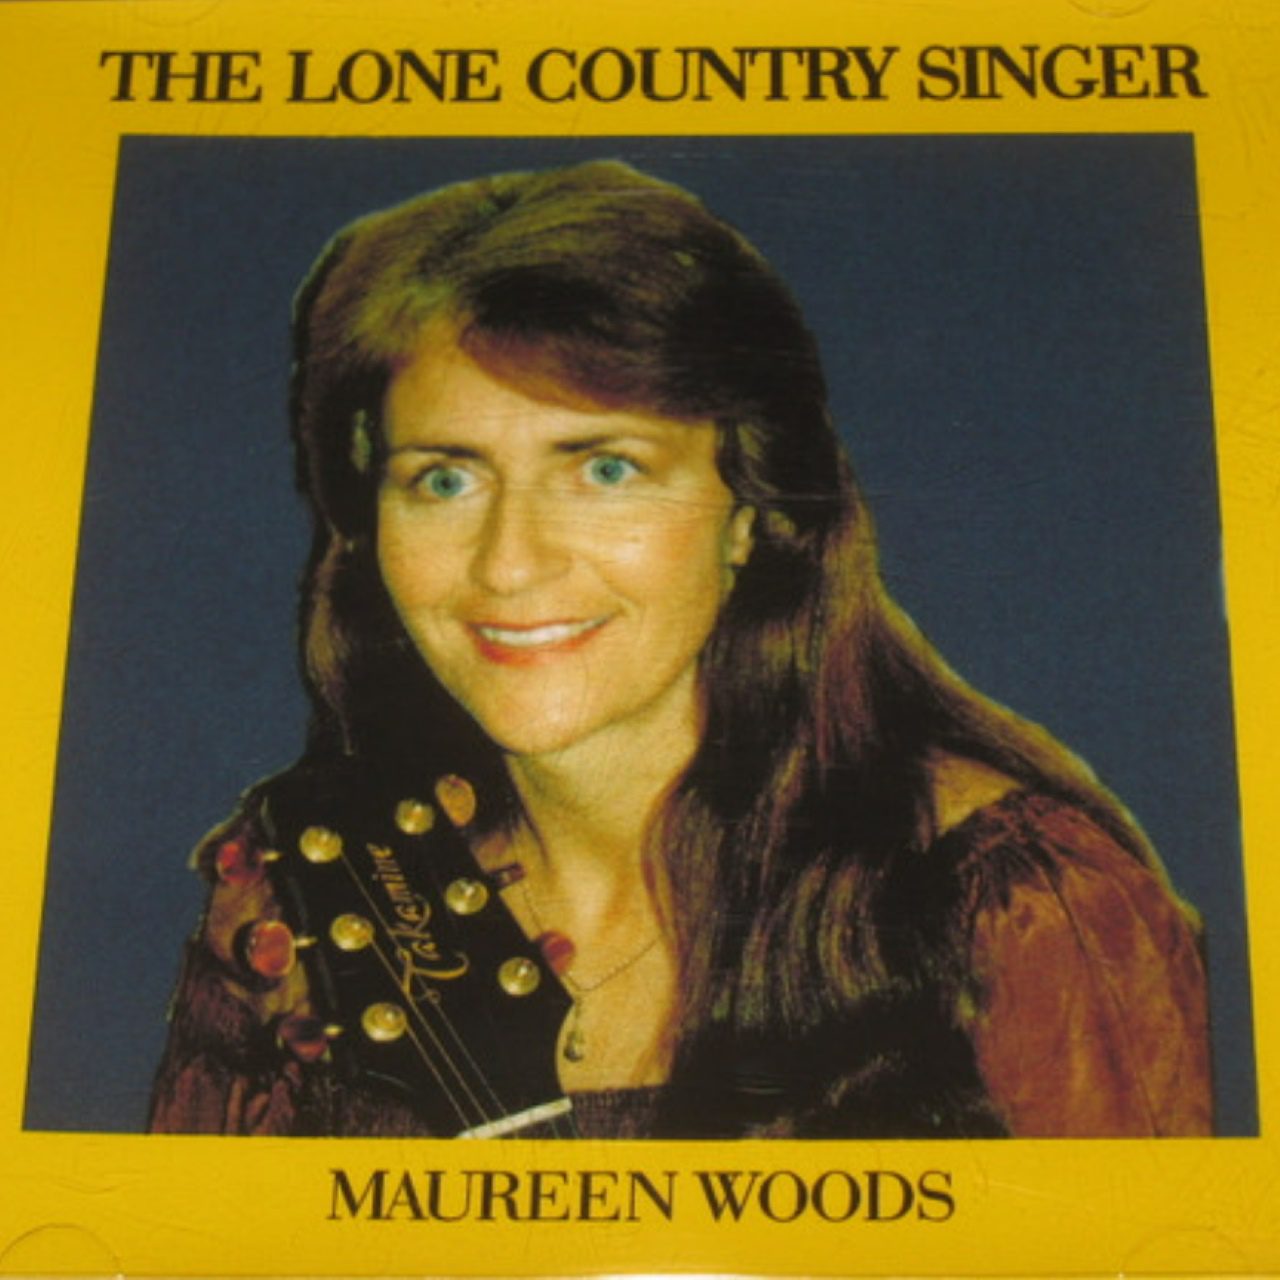 Maureen Woods – The Lone Country Singer cover album